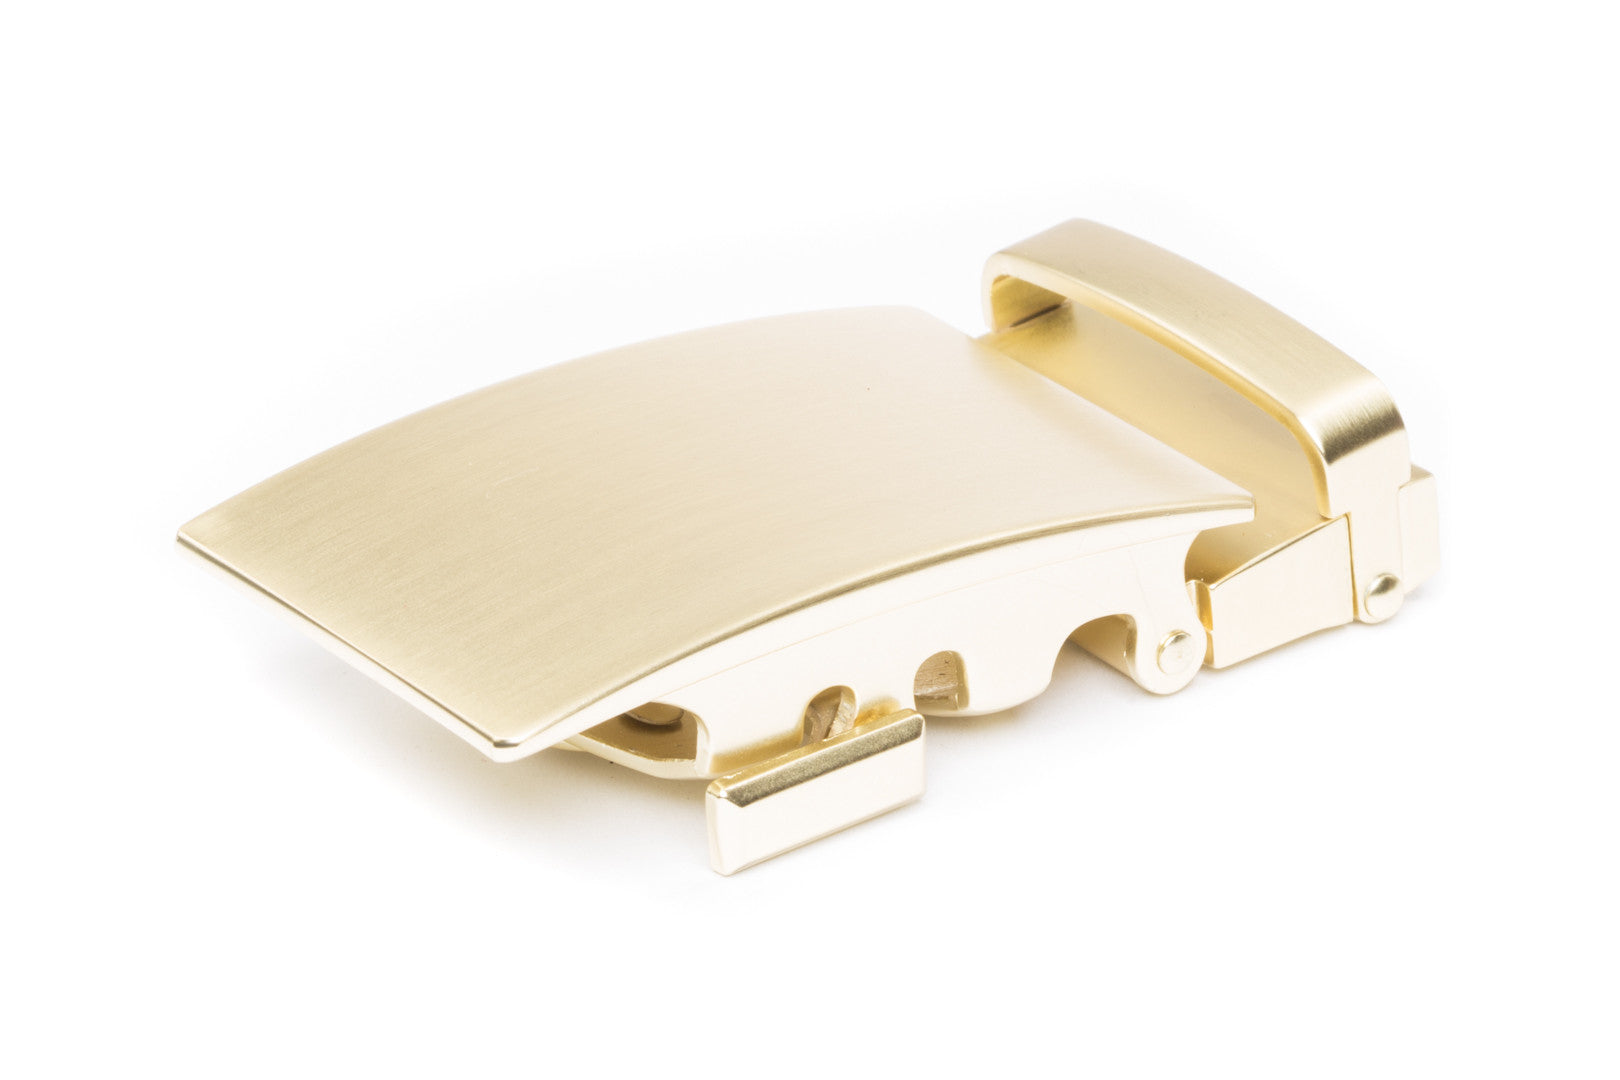 Men's classic ratchet belt buckle in matte gold with a width of 1.5 inches.